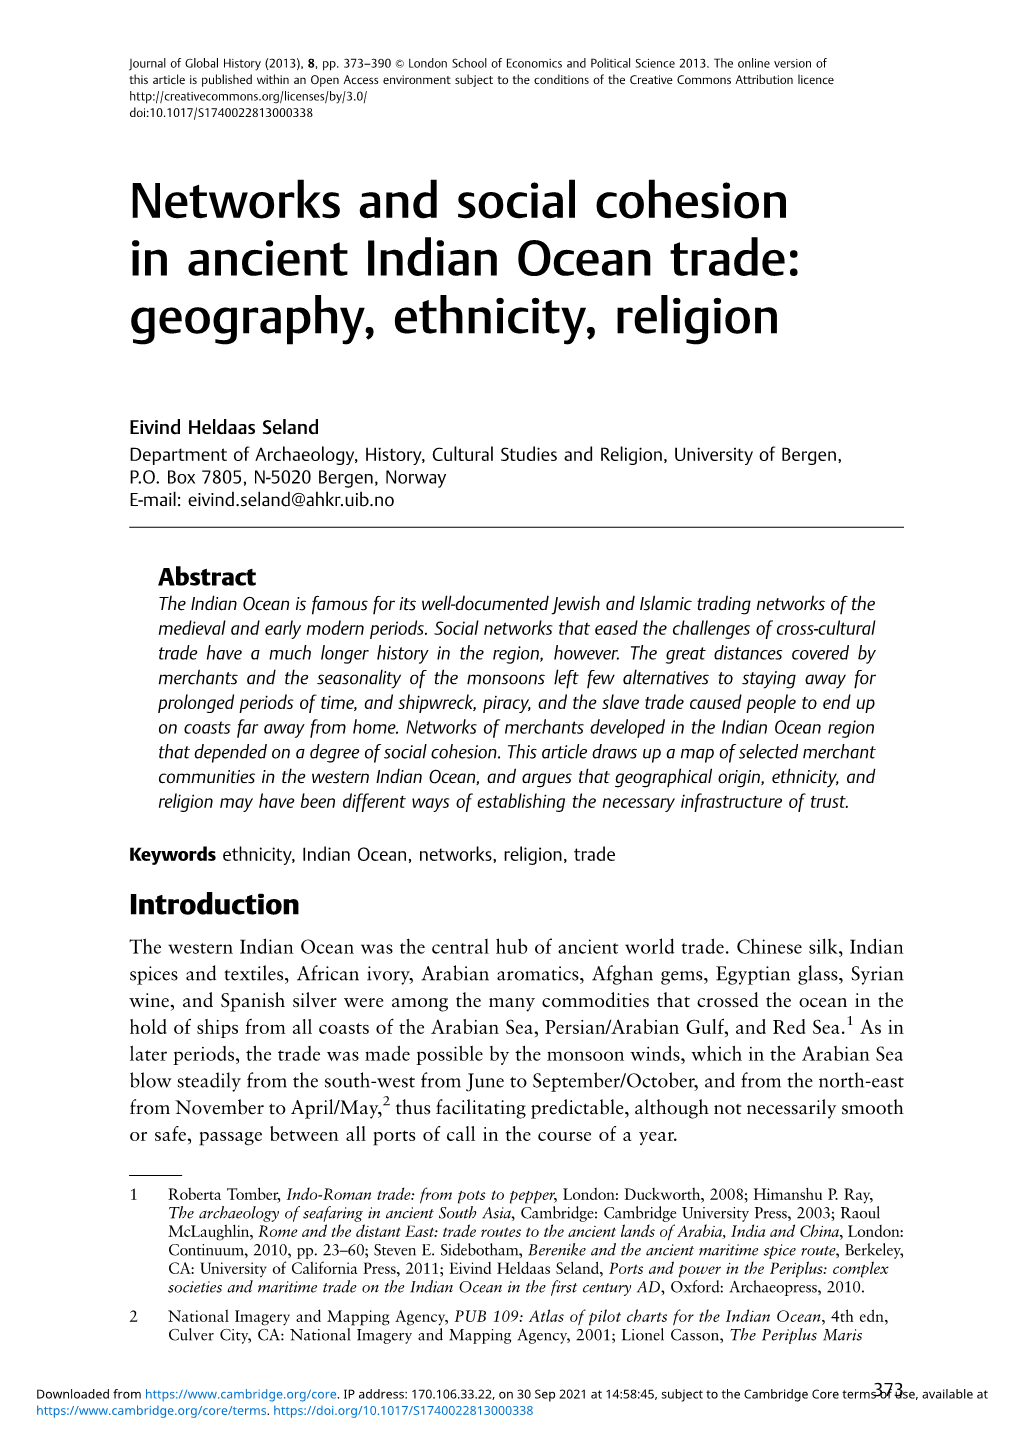 Networks and Social Cohesion in Ancient Indian Ocean Trade: Geography, Ethnicity, Religion